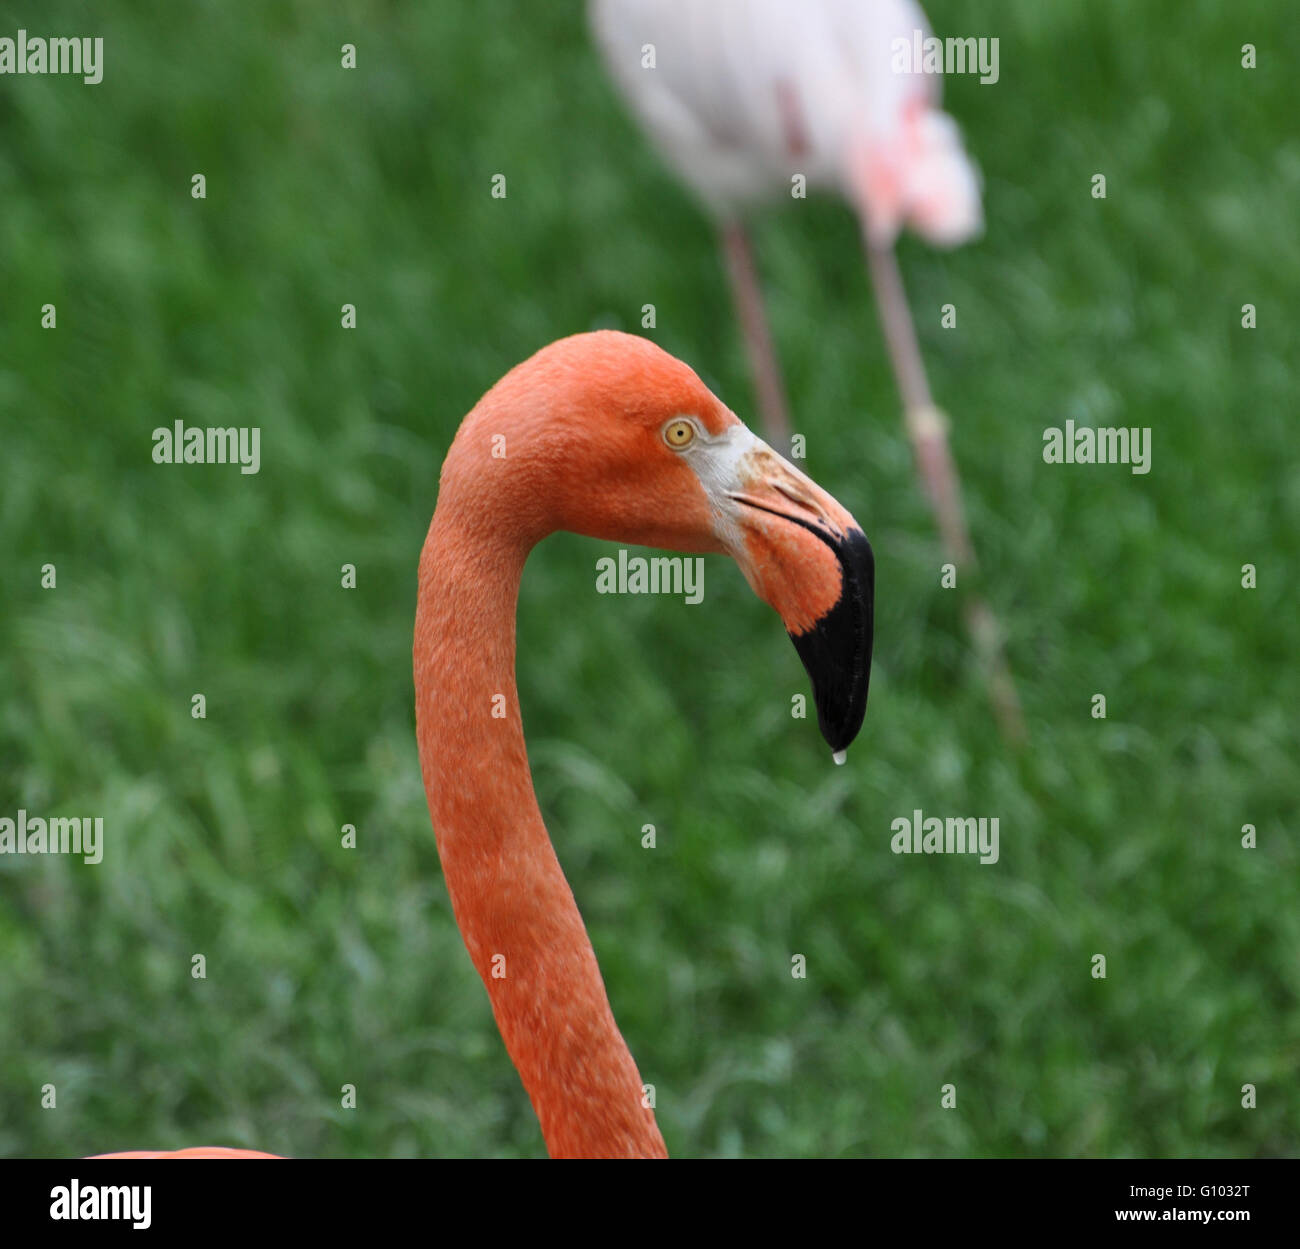 Head of pink flamingo on a background of green grass, close-up Stock Photo